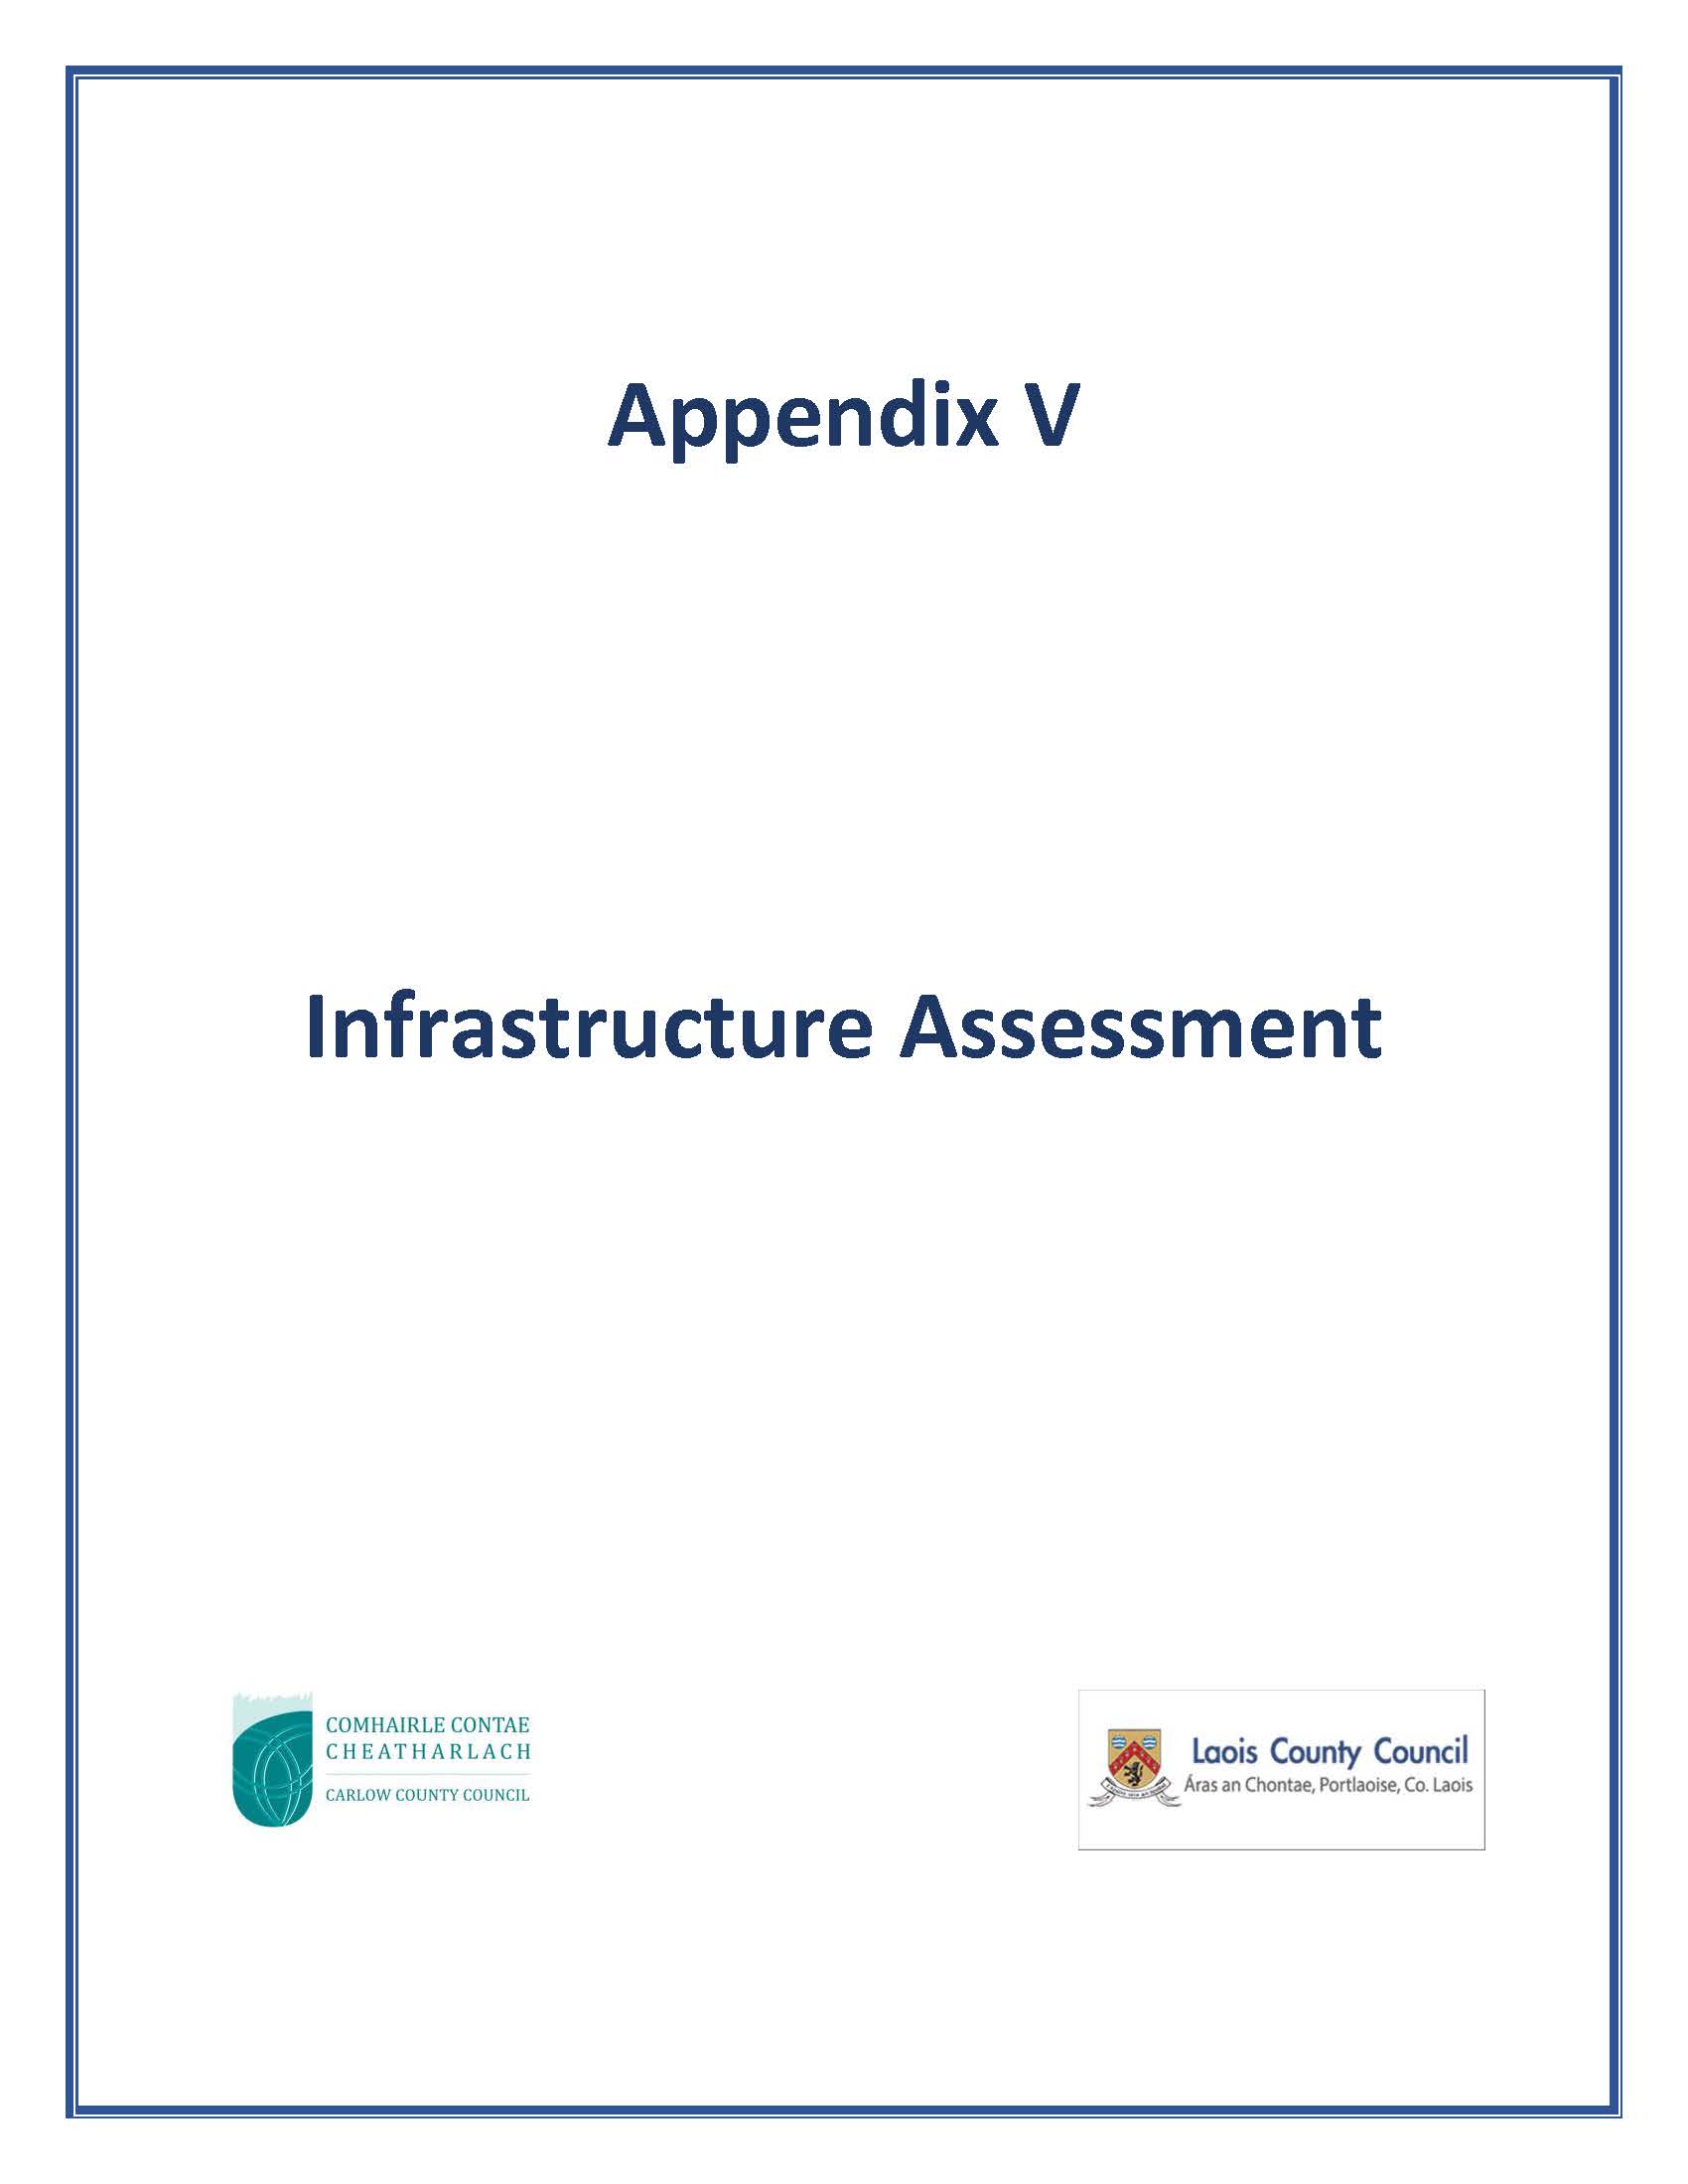 Appendix V cover page: Infrastructure Assessment